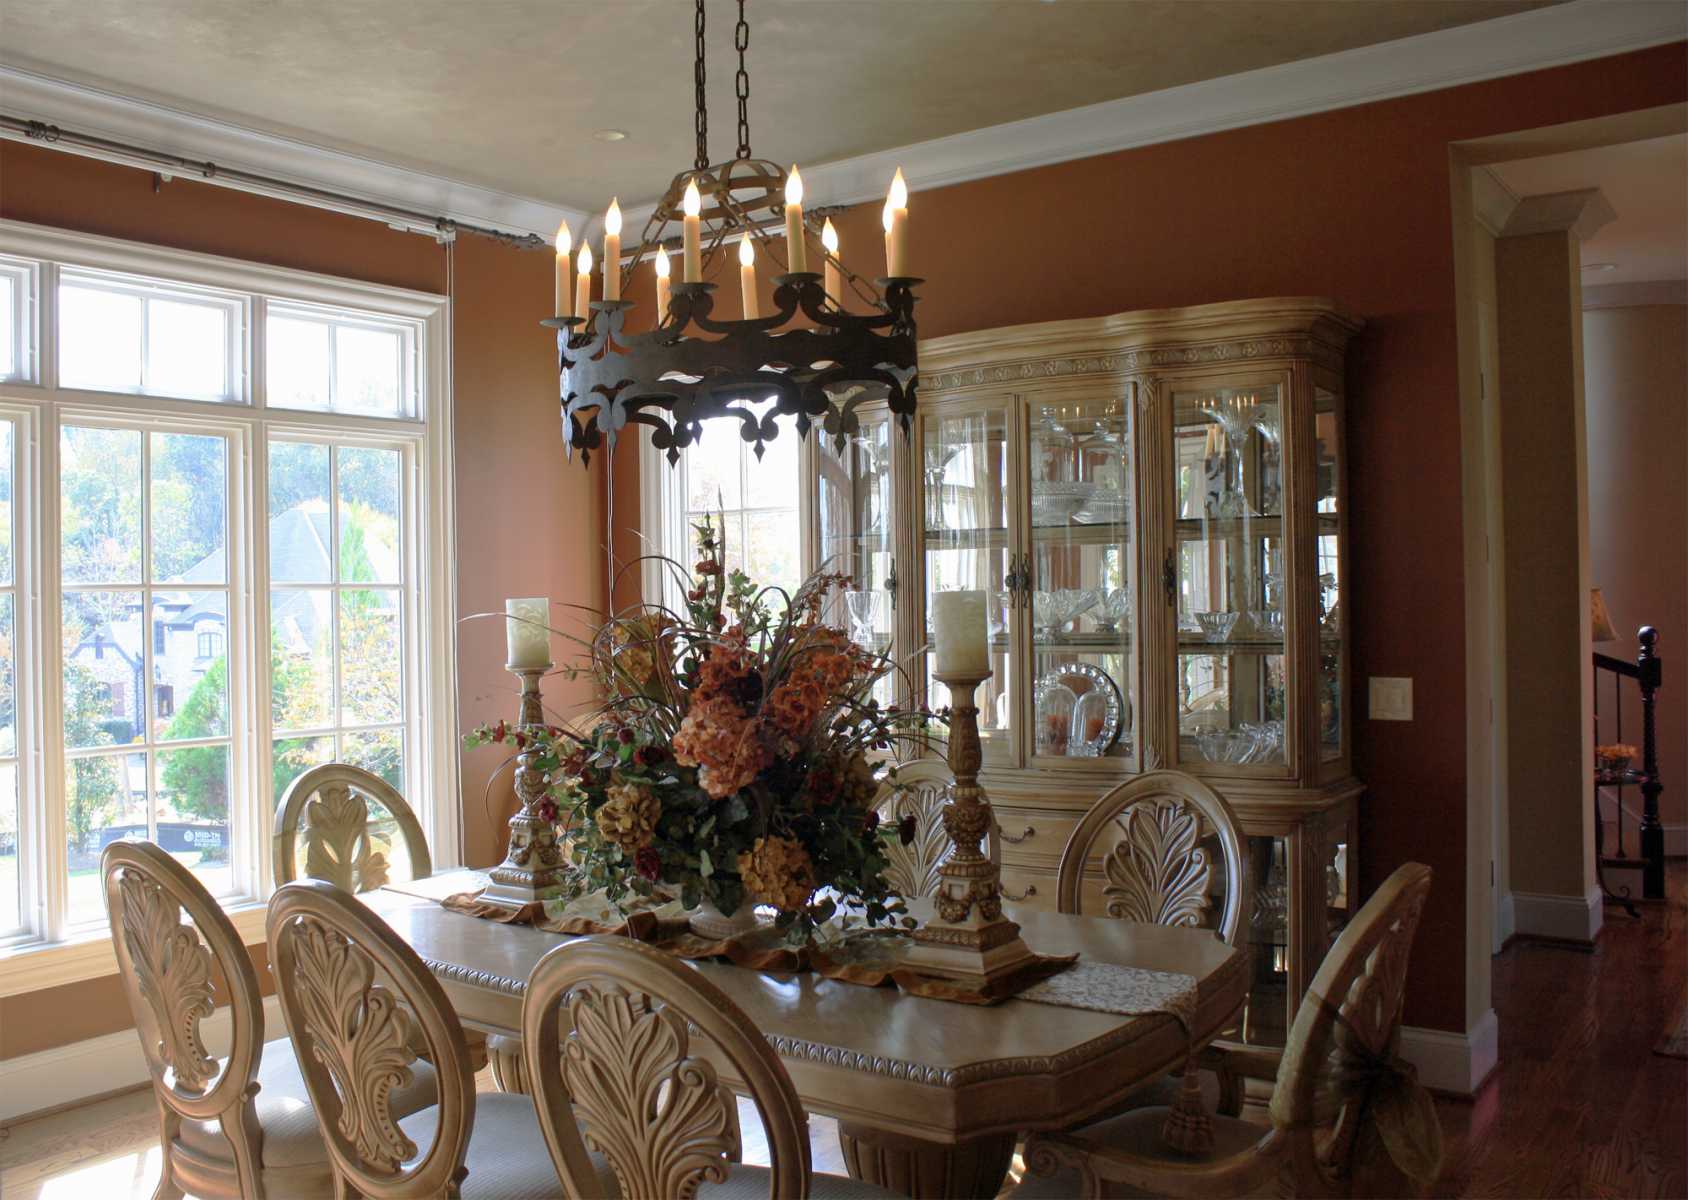 Beautiful wall color and shimmering accented ceiling complete this dining rooms design.